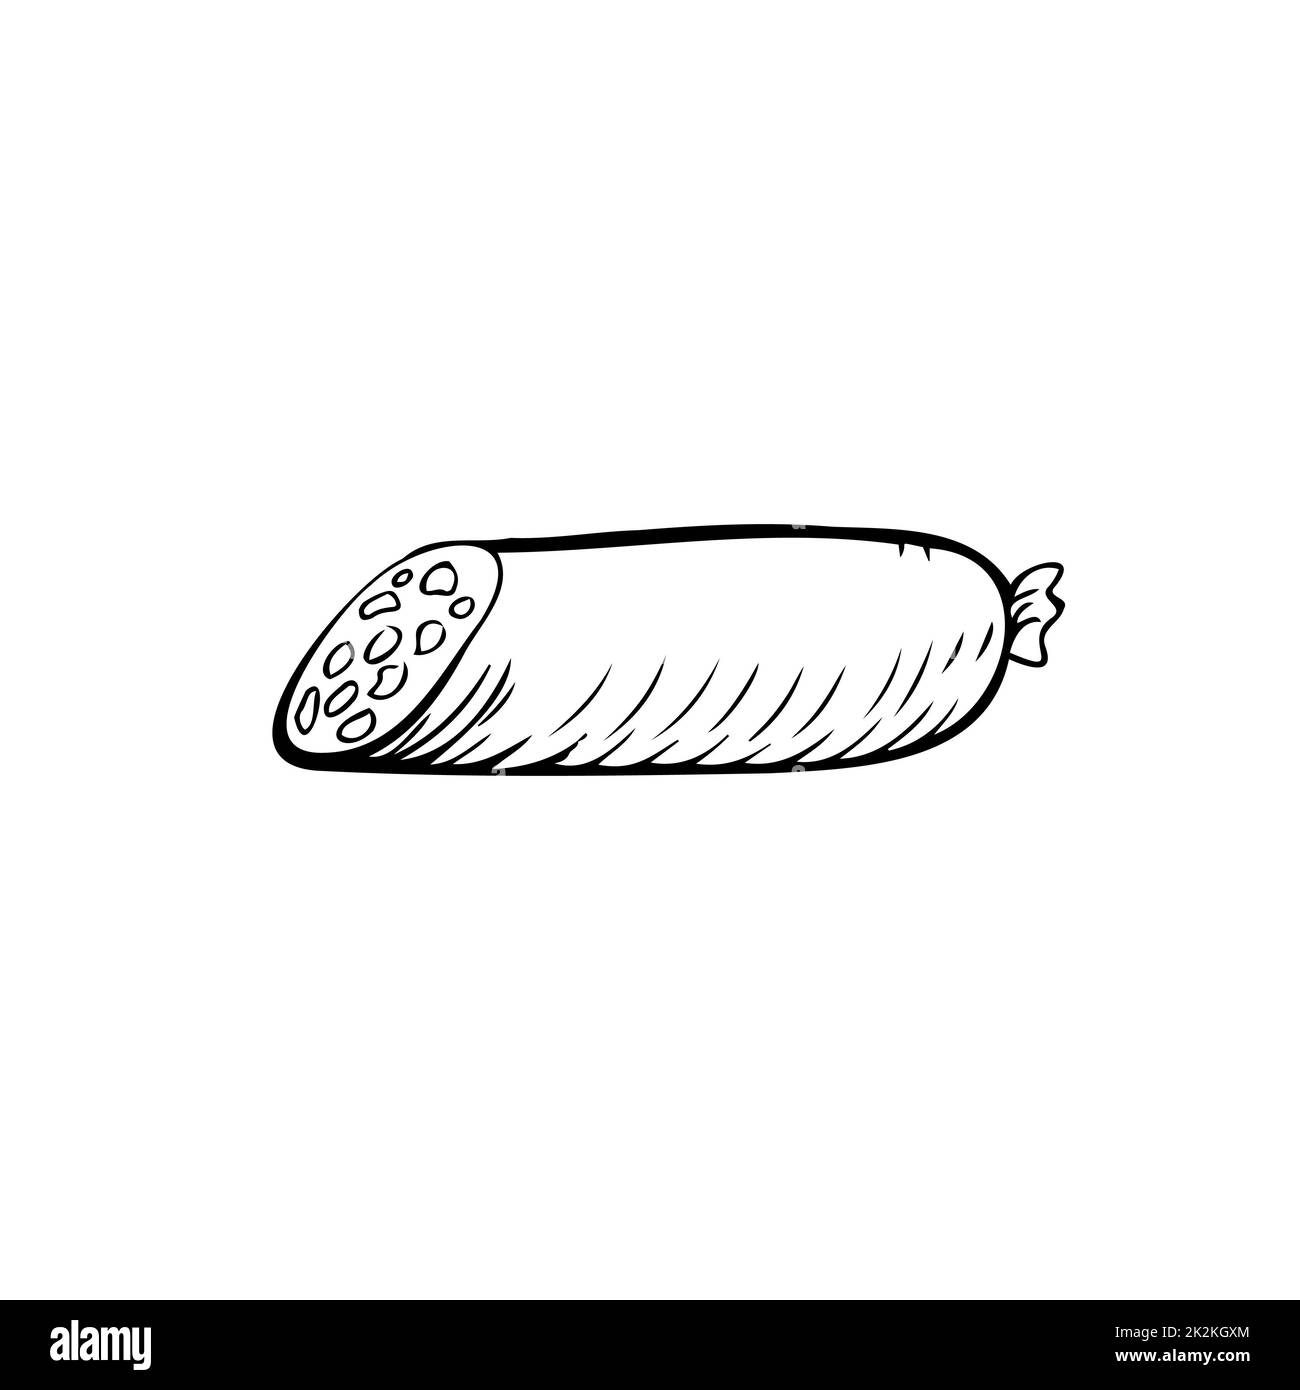 Sausage thin black lines on a white background - Vector Stock Photo